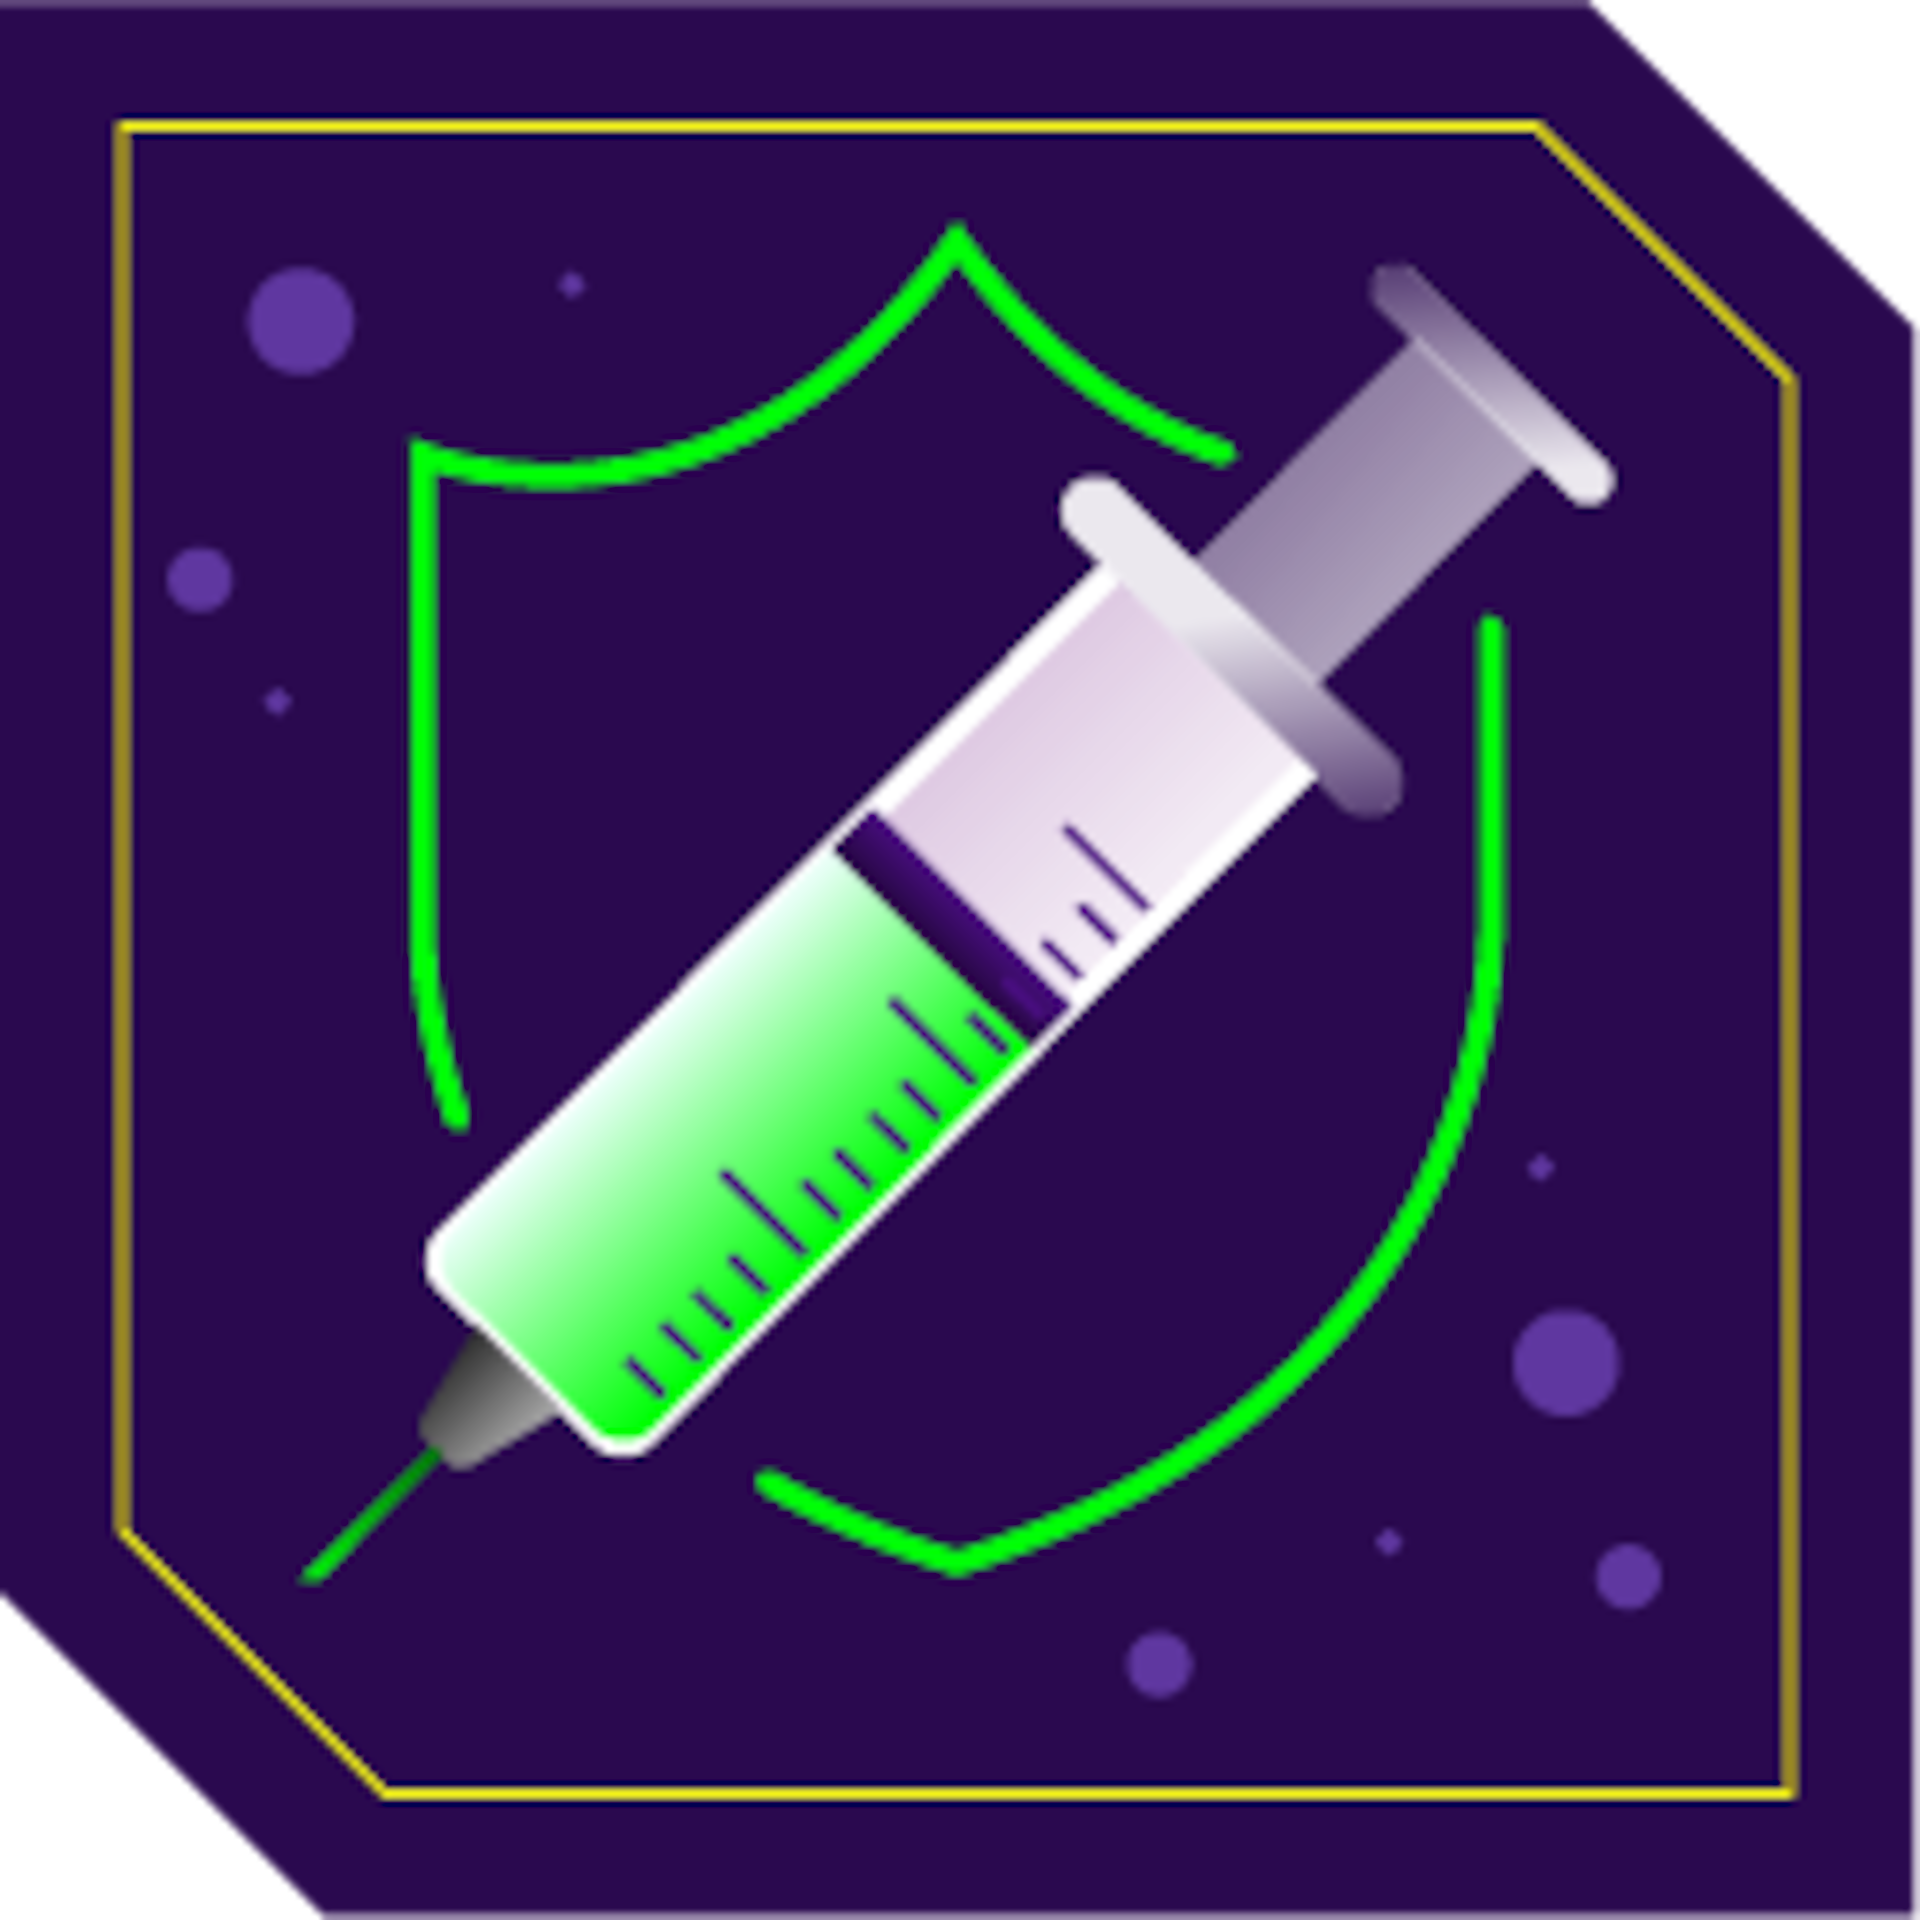 Syringe with a shield in the background, surrounded by viruses